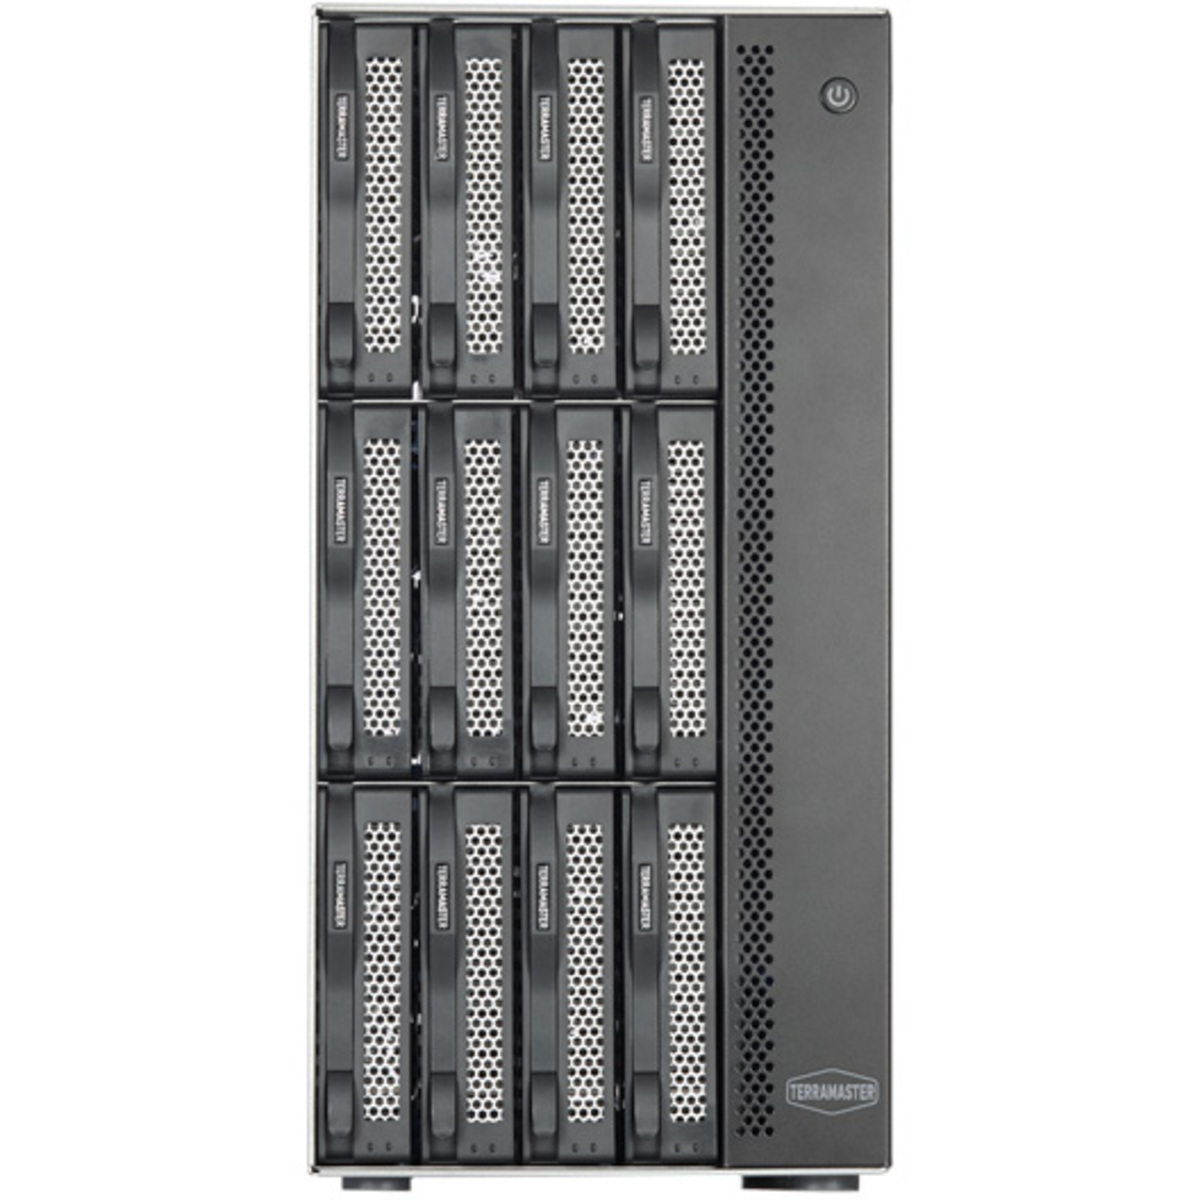 TerraMaster T12-423 NAS - Network Attached Storage Device Burn-In Tested Configurations